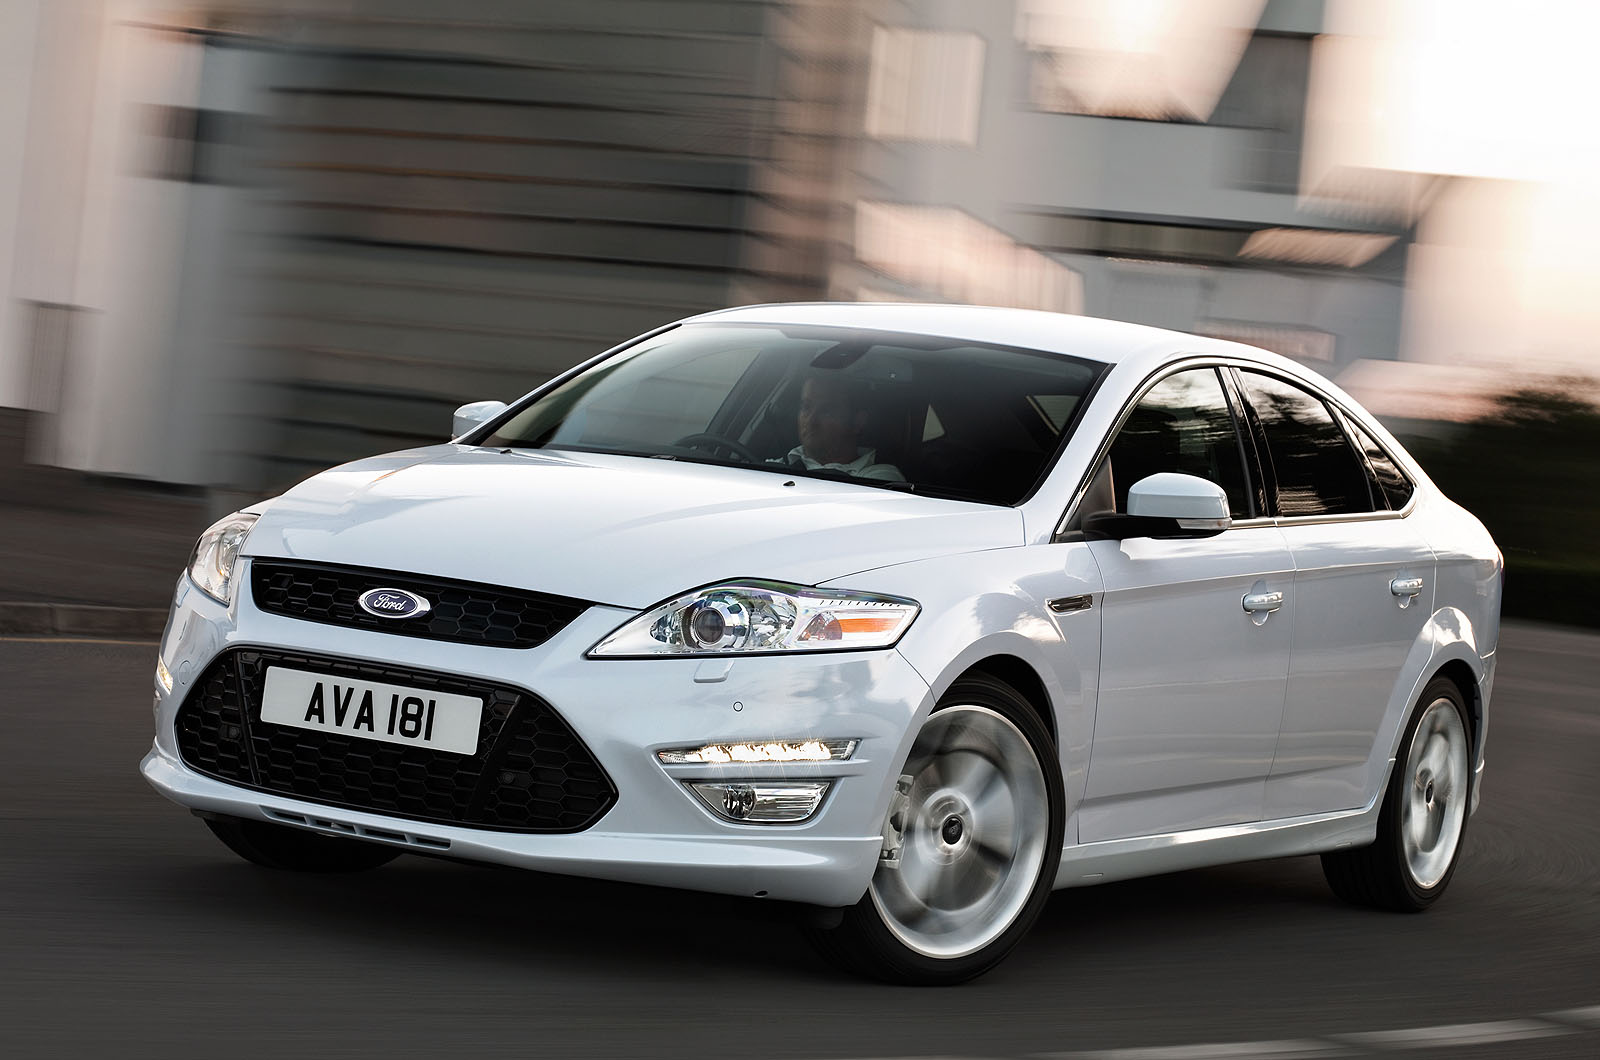 Ford Mondeo 2.2 TDCi review Autocar